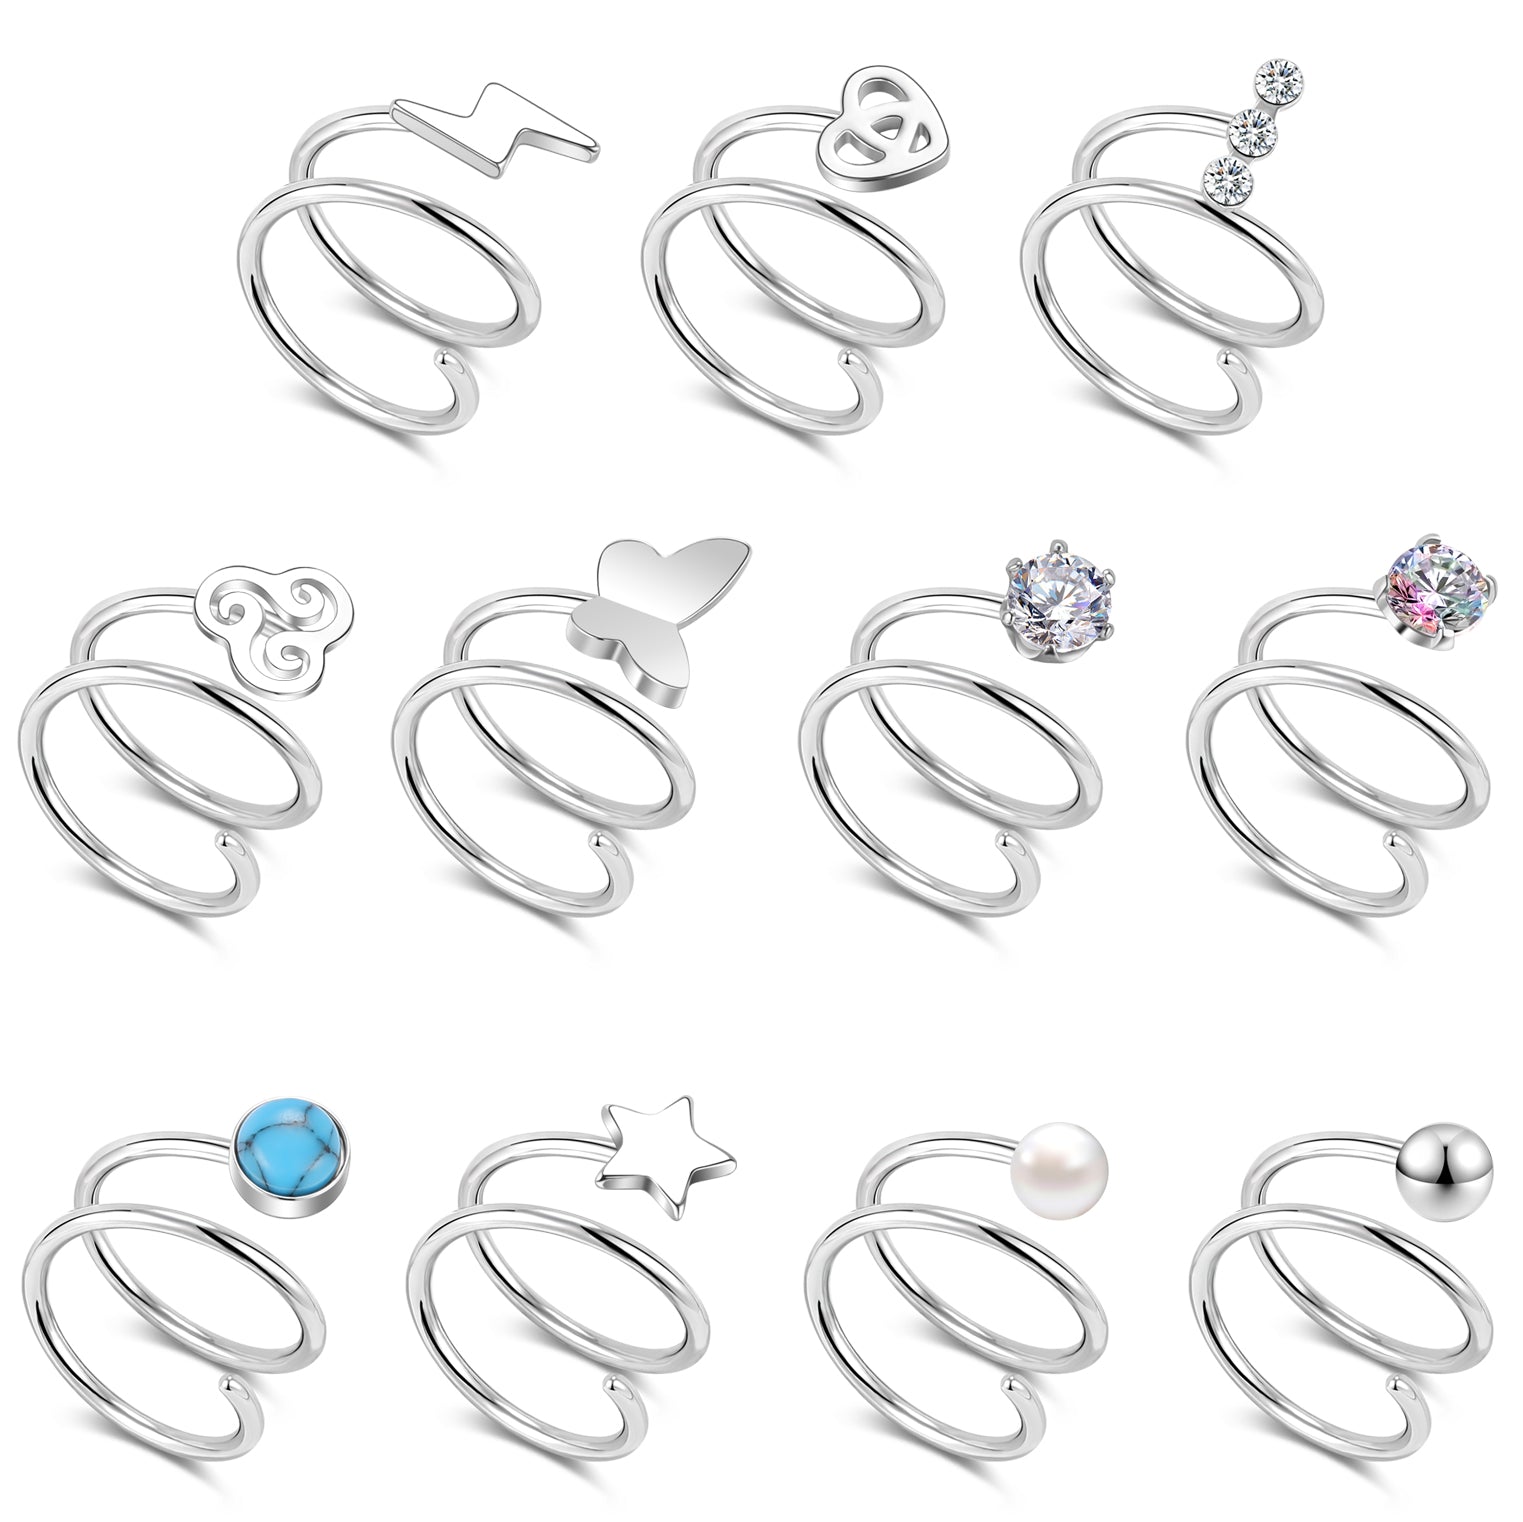 20G-Lightning-Shape-Nose-Rings-Double-Layered-Spiral-Nose-Piercing-Stainless-Steel-Nostril-Rings